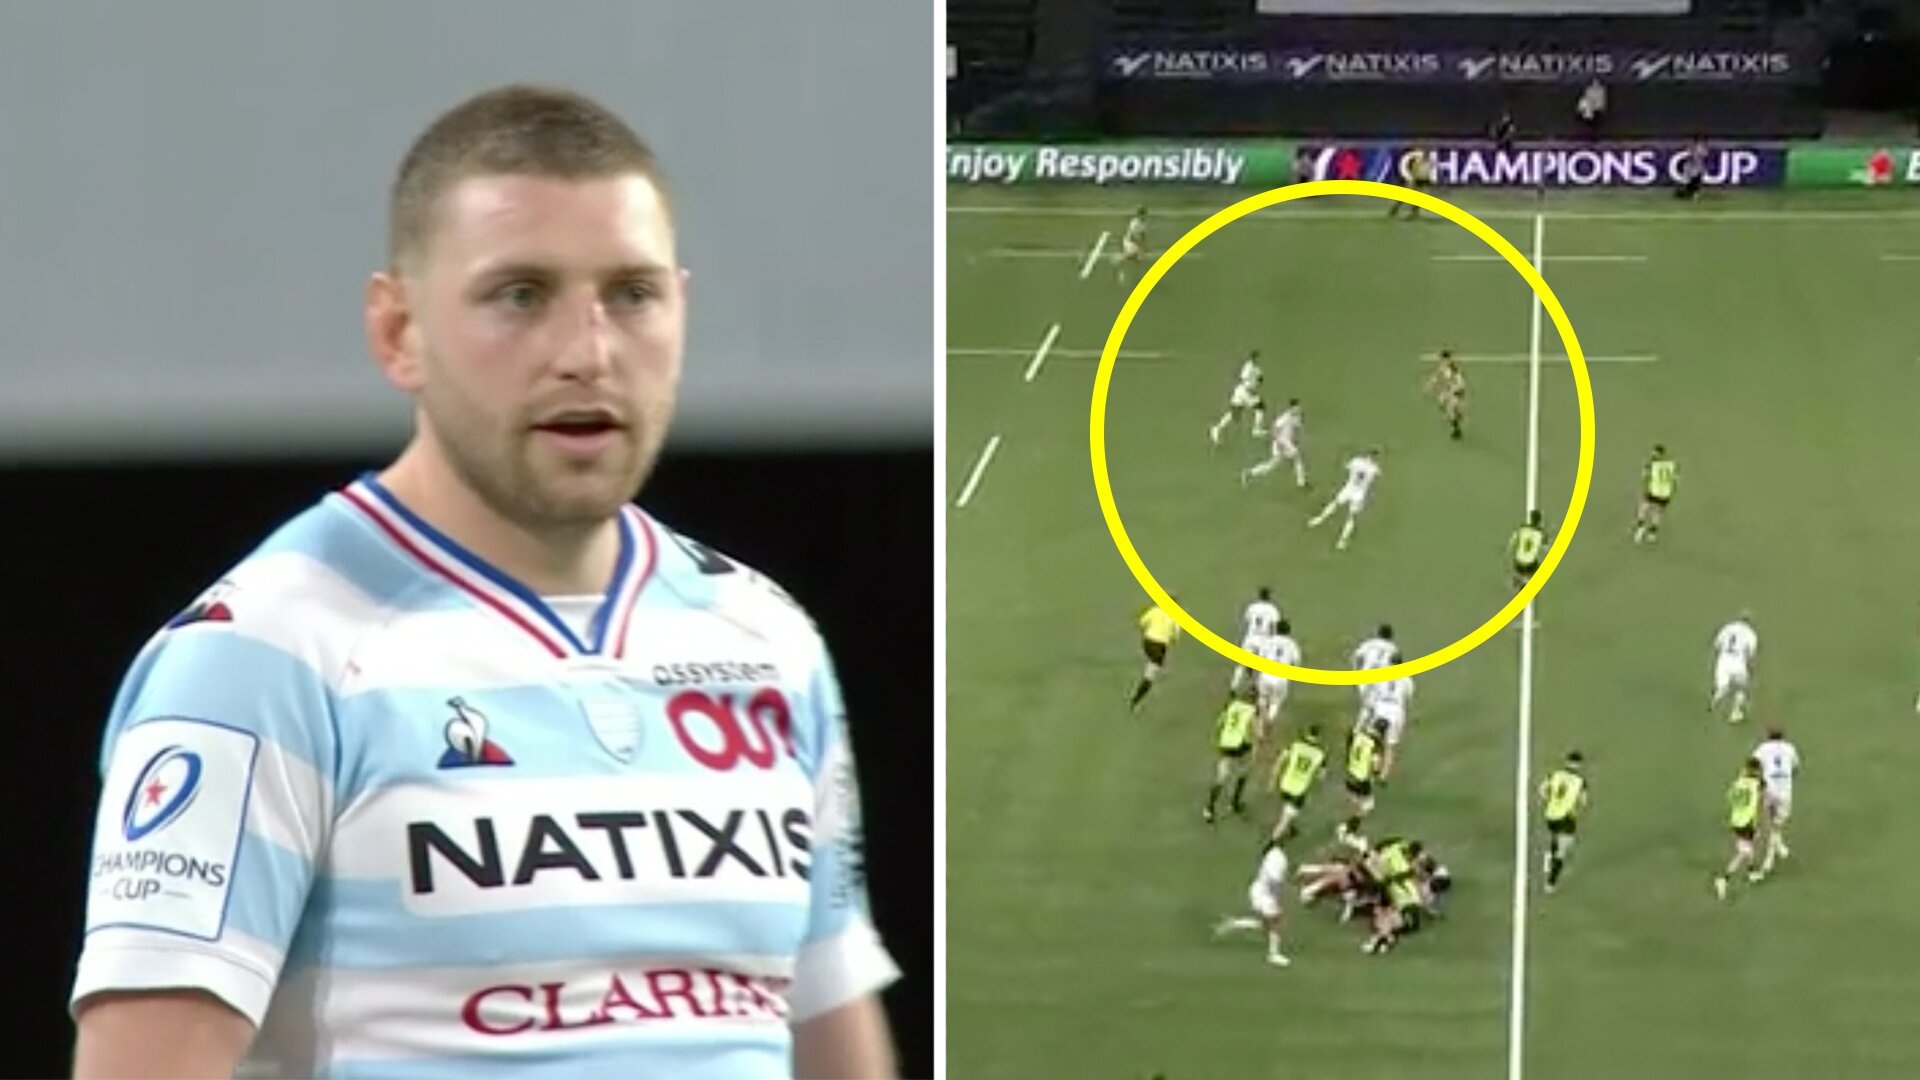 Finn Russell is tearing everything apart in the Champions Cup